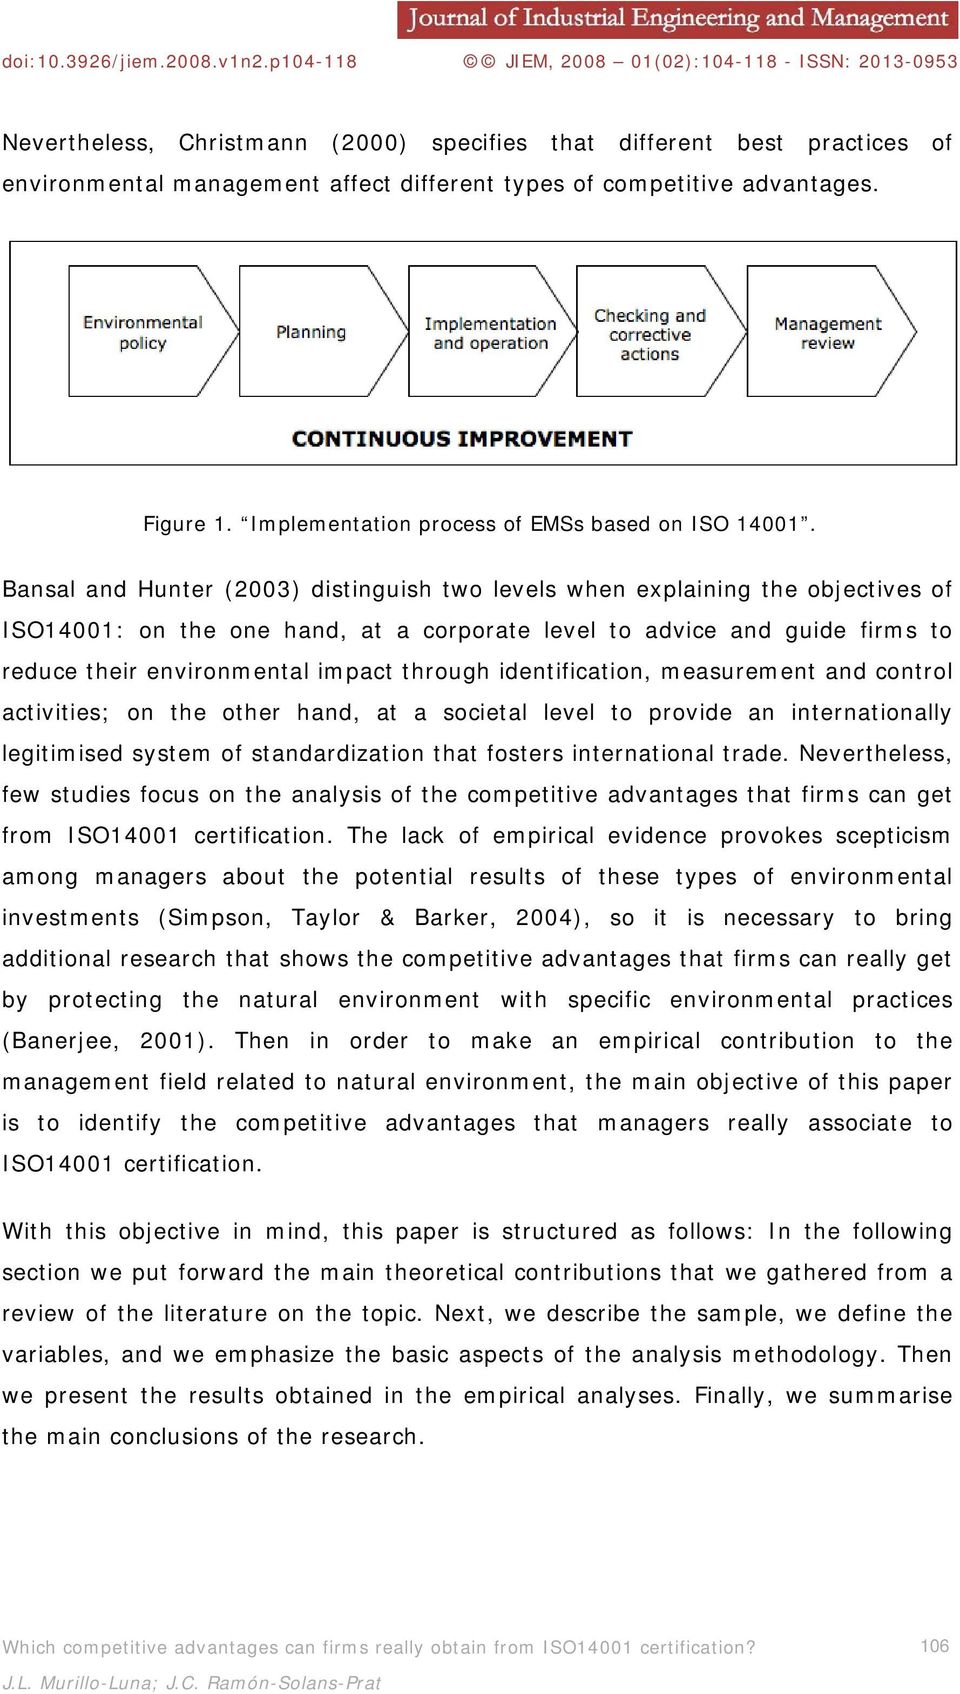 Bansal and Hunter (2003) distinguish two levels when explaining the objectives of ISO14001: on the one hand, at a corporate level to advice and guide firms to reduce their environmental impact